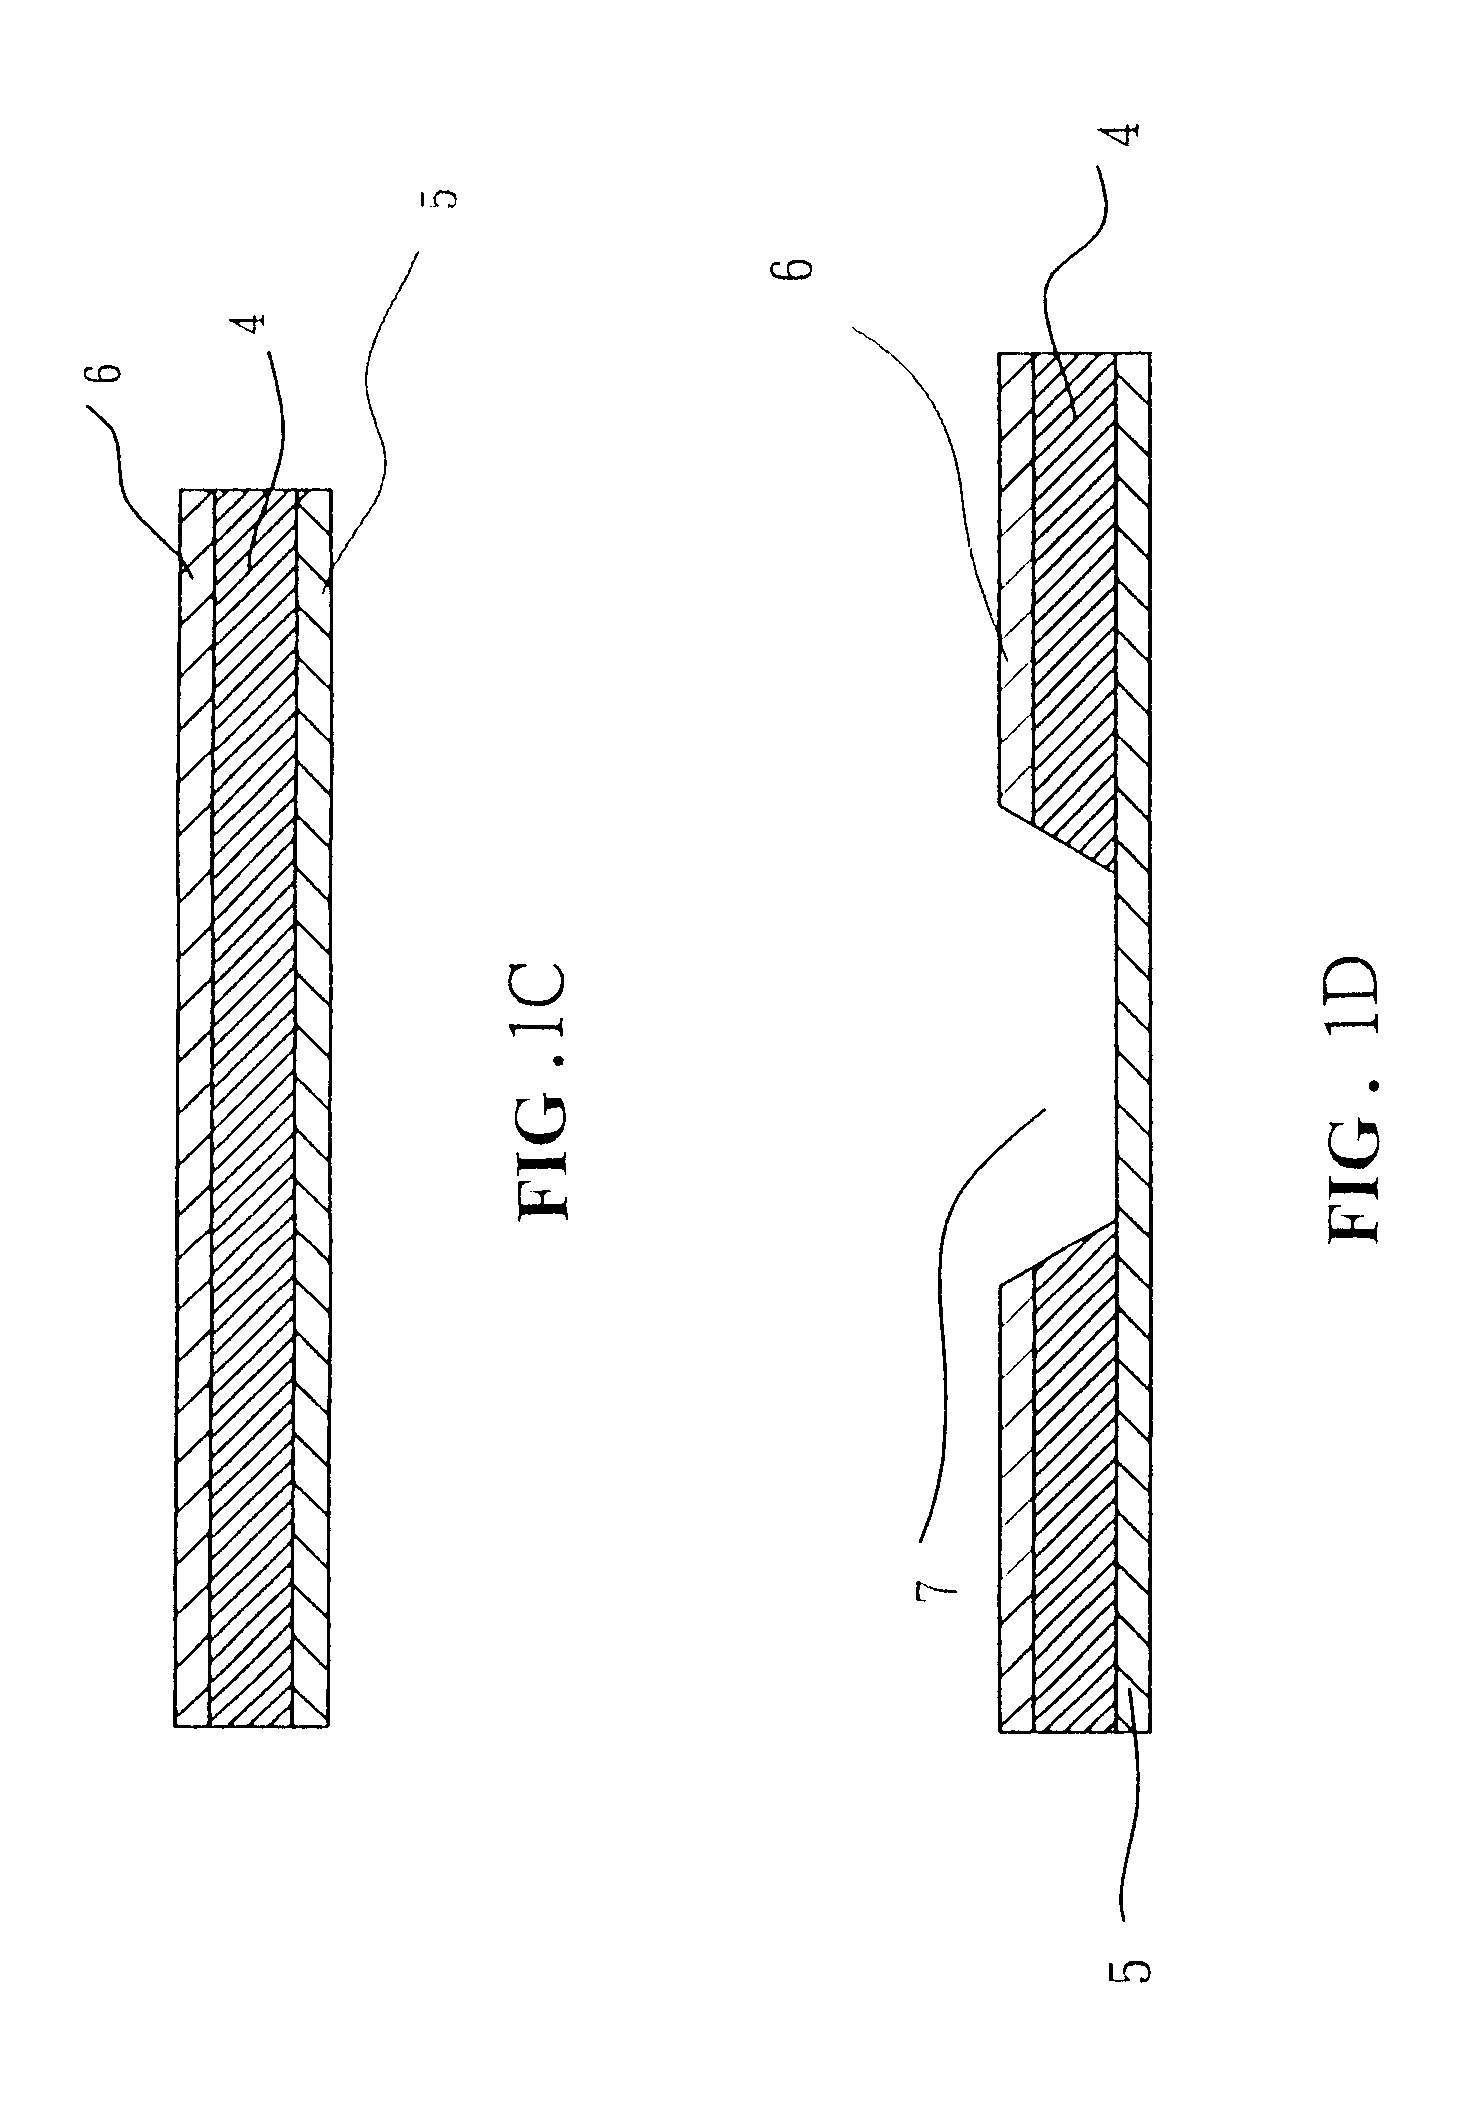 SMT-type structure of the silicon-based electret condenser microphone